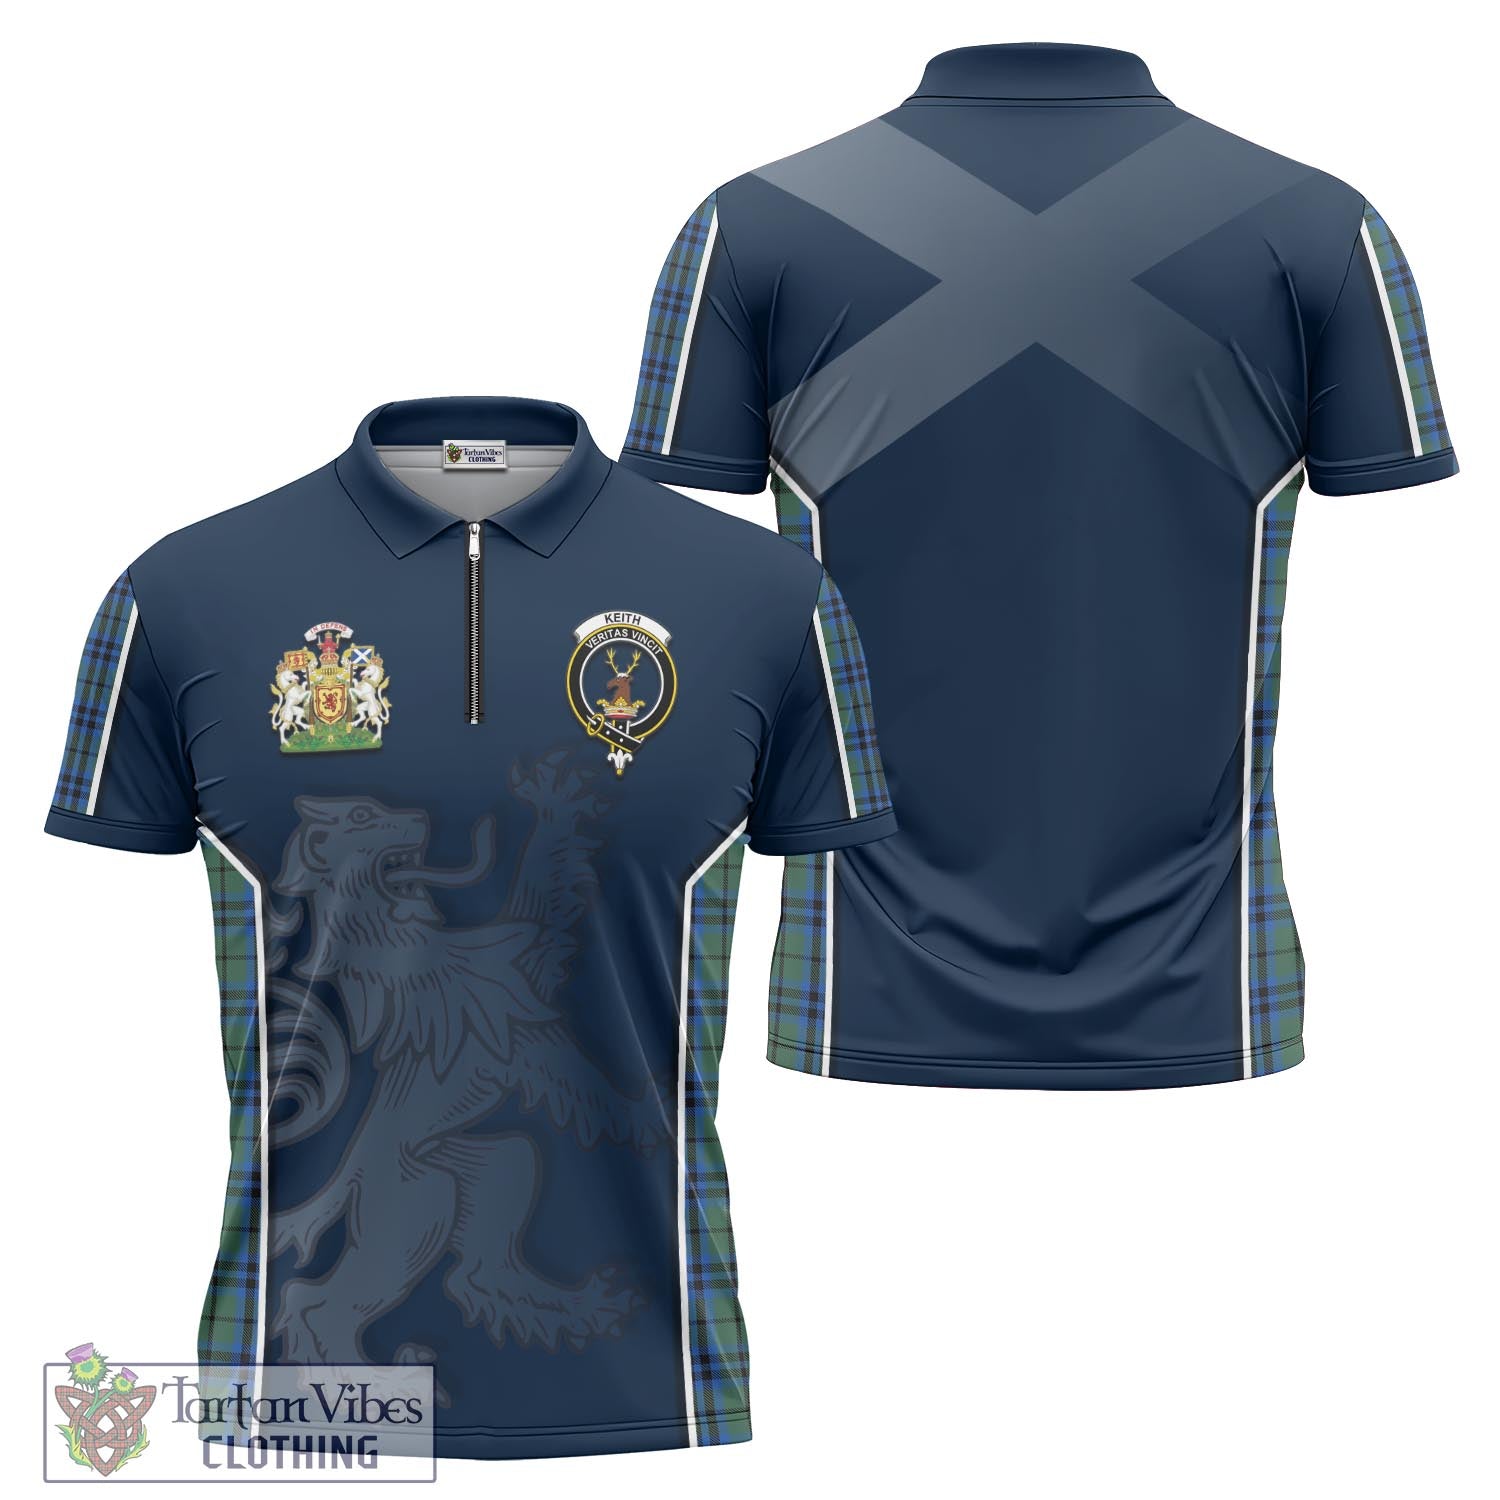 Tartan Vibes Clothing Keith Tartan Zipper Polo Shirt with Family Crest and Lion Rampant Vibes Sport Style